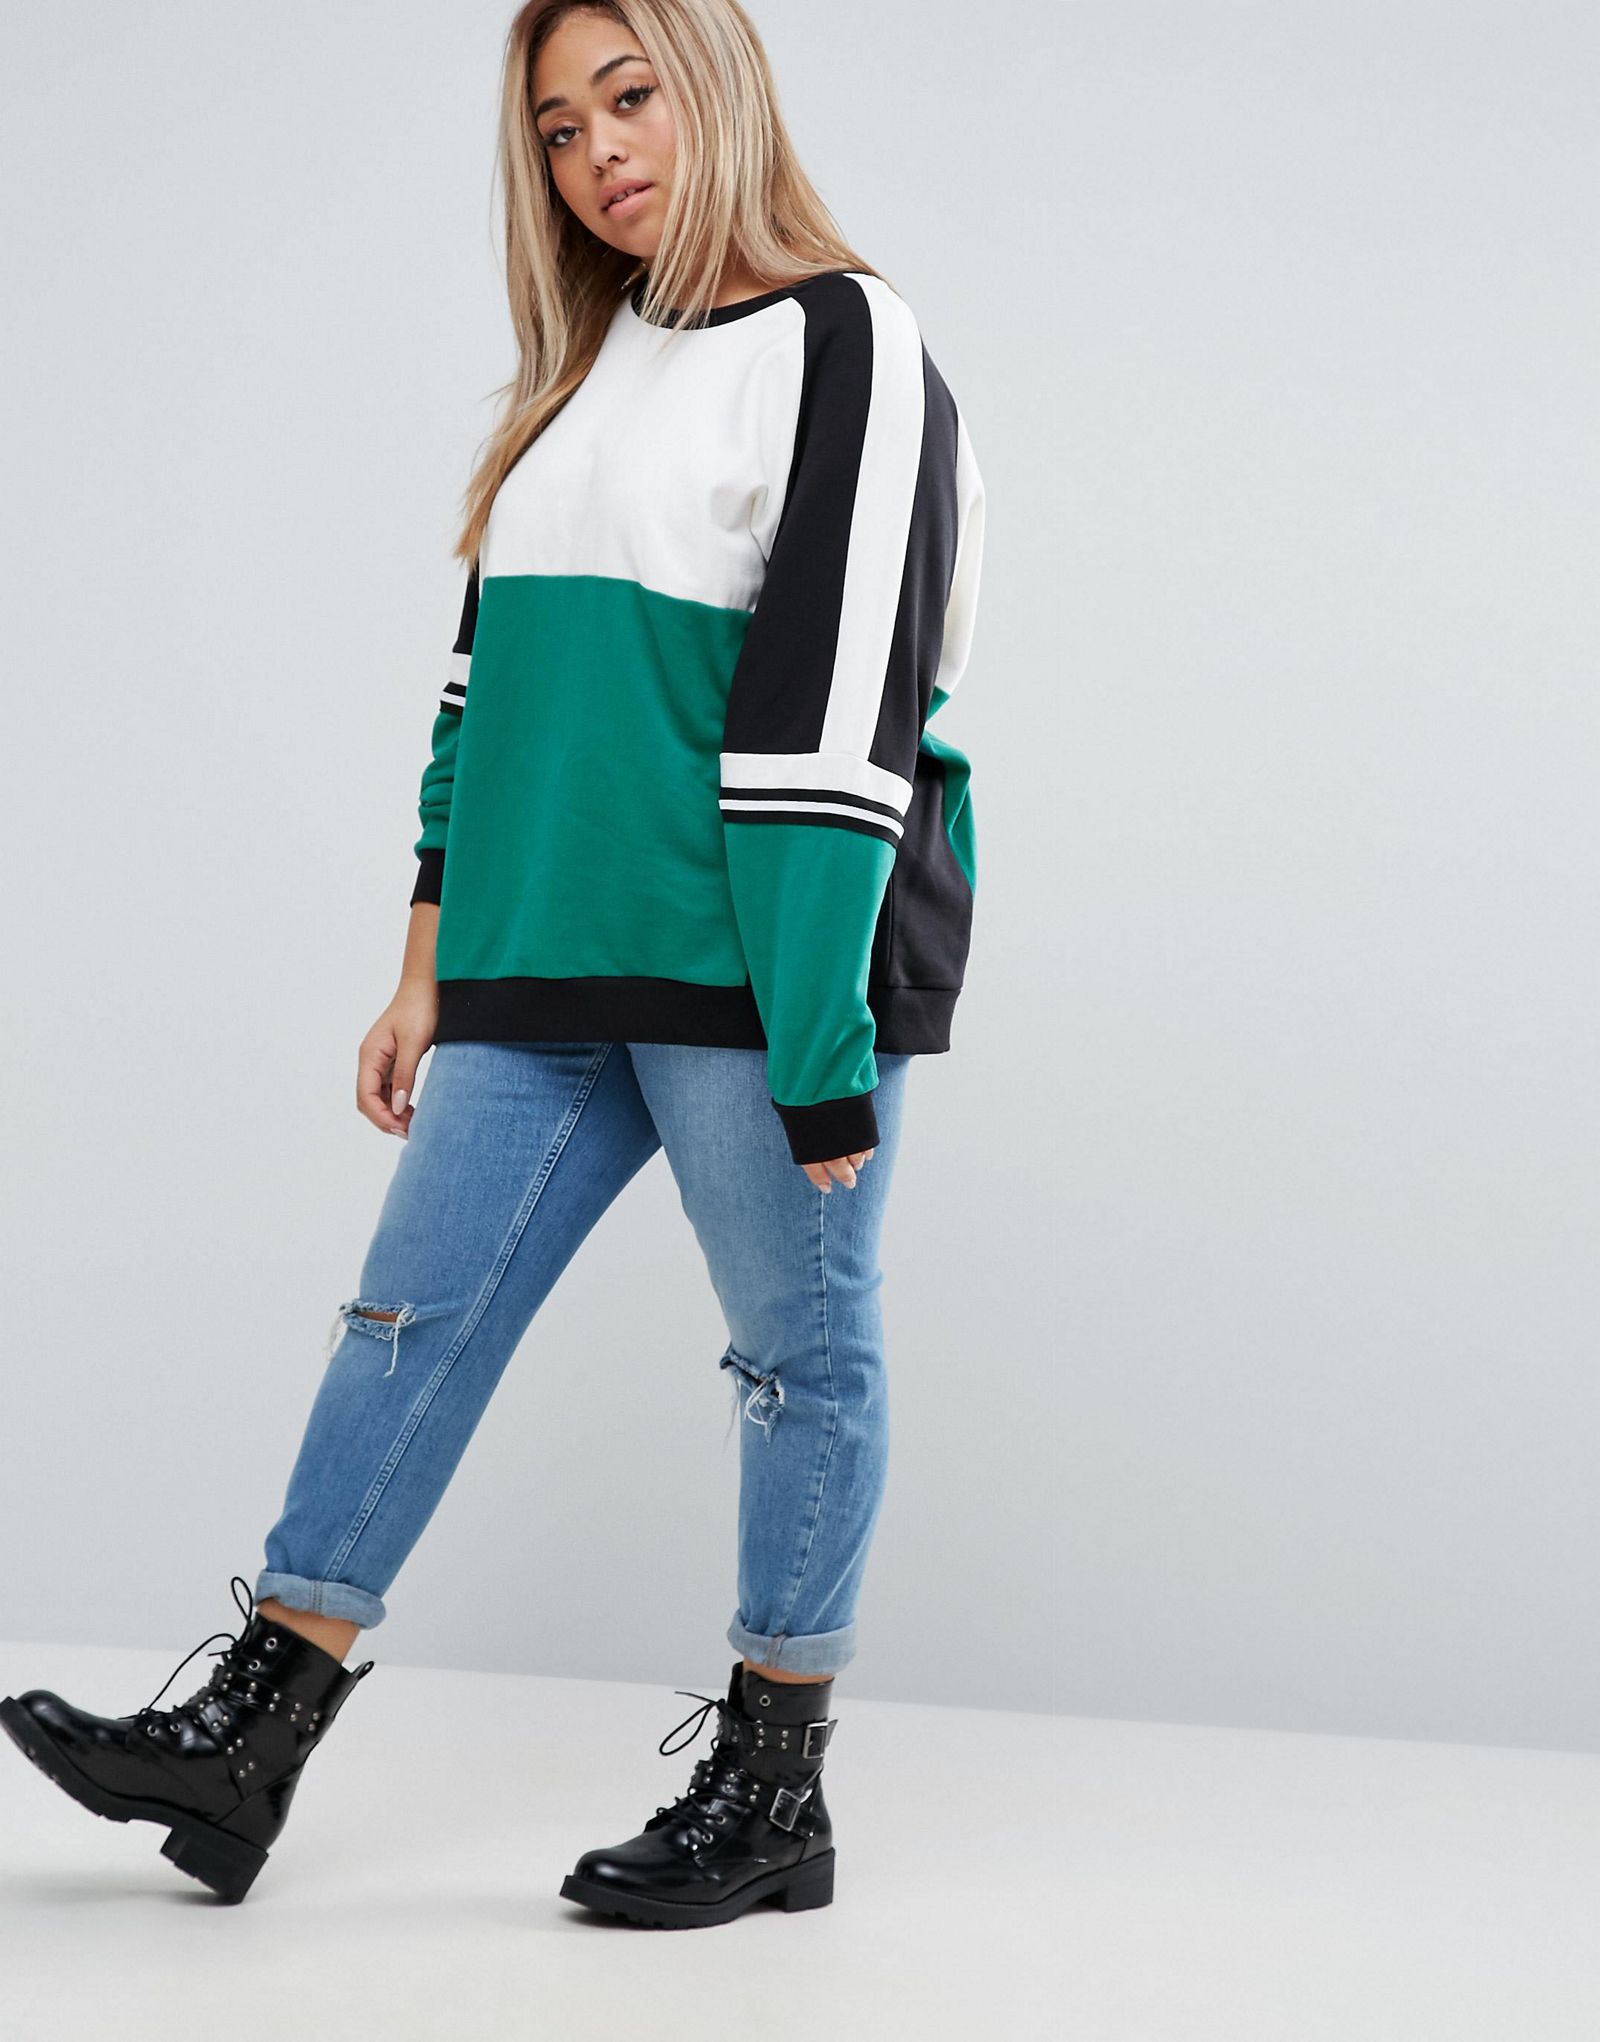 ASOS CURVE Sweatshirt with Contrast Panelling